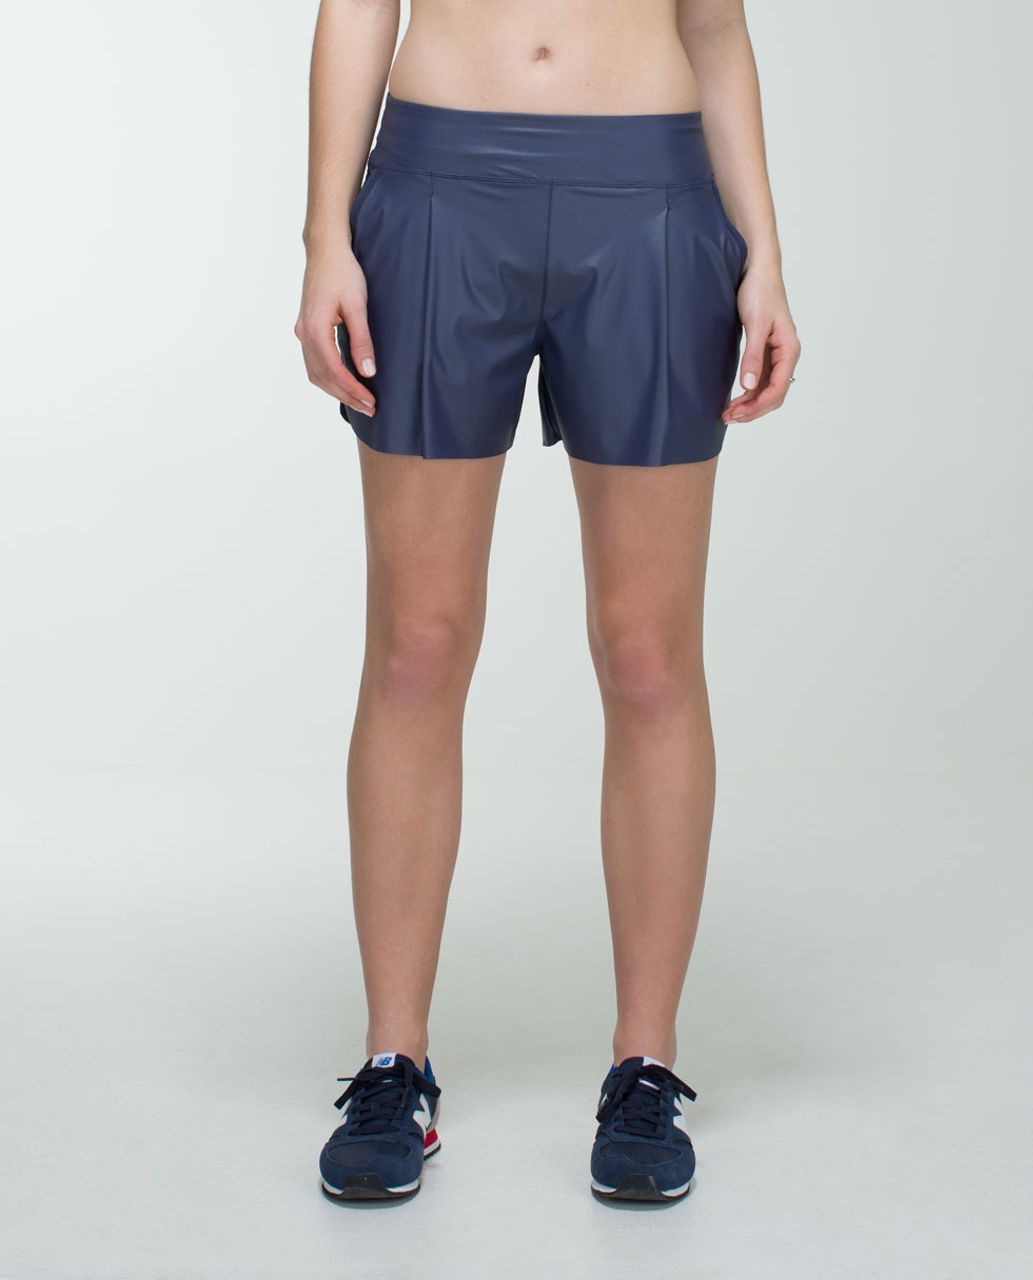 Lululemon Here To There Short - Cadet Blue